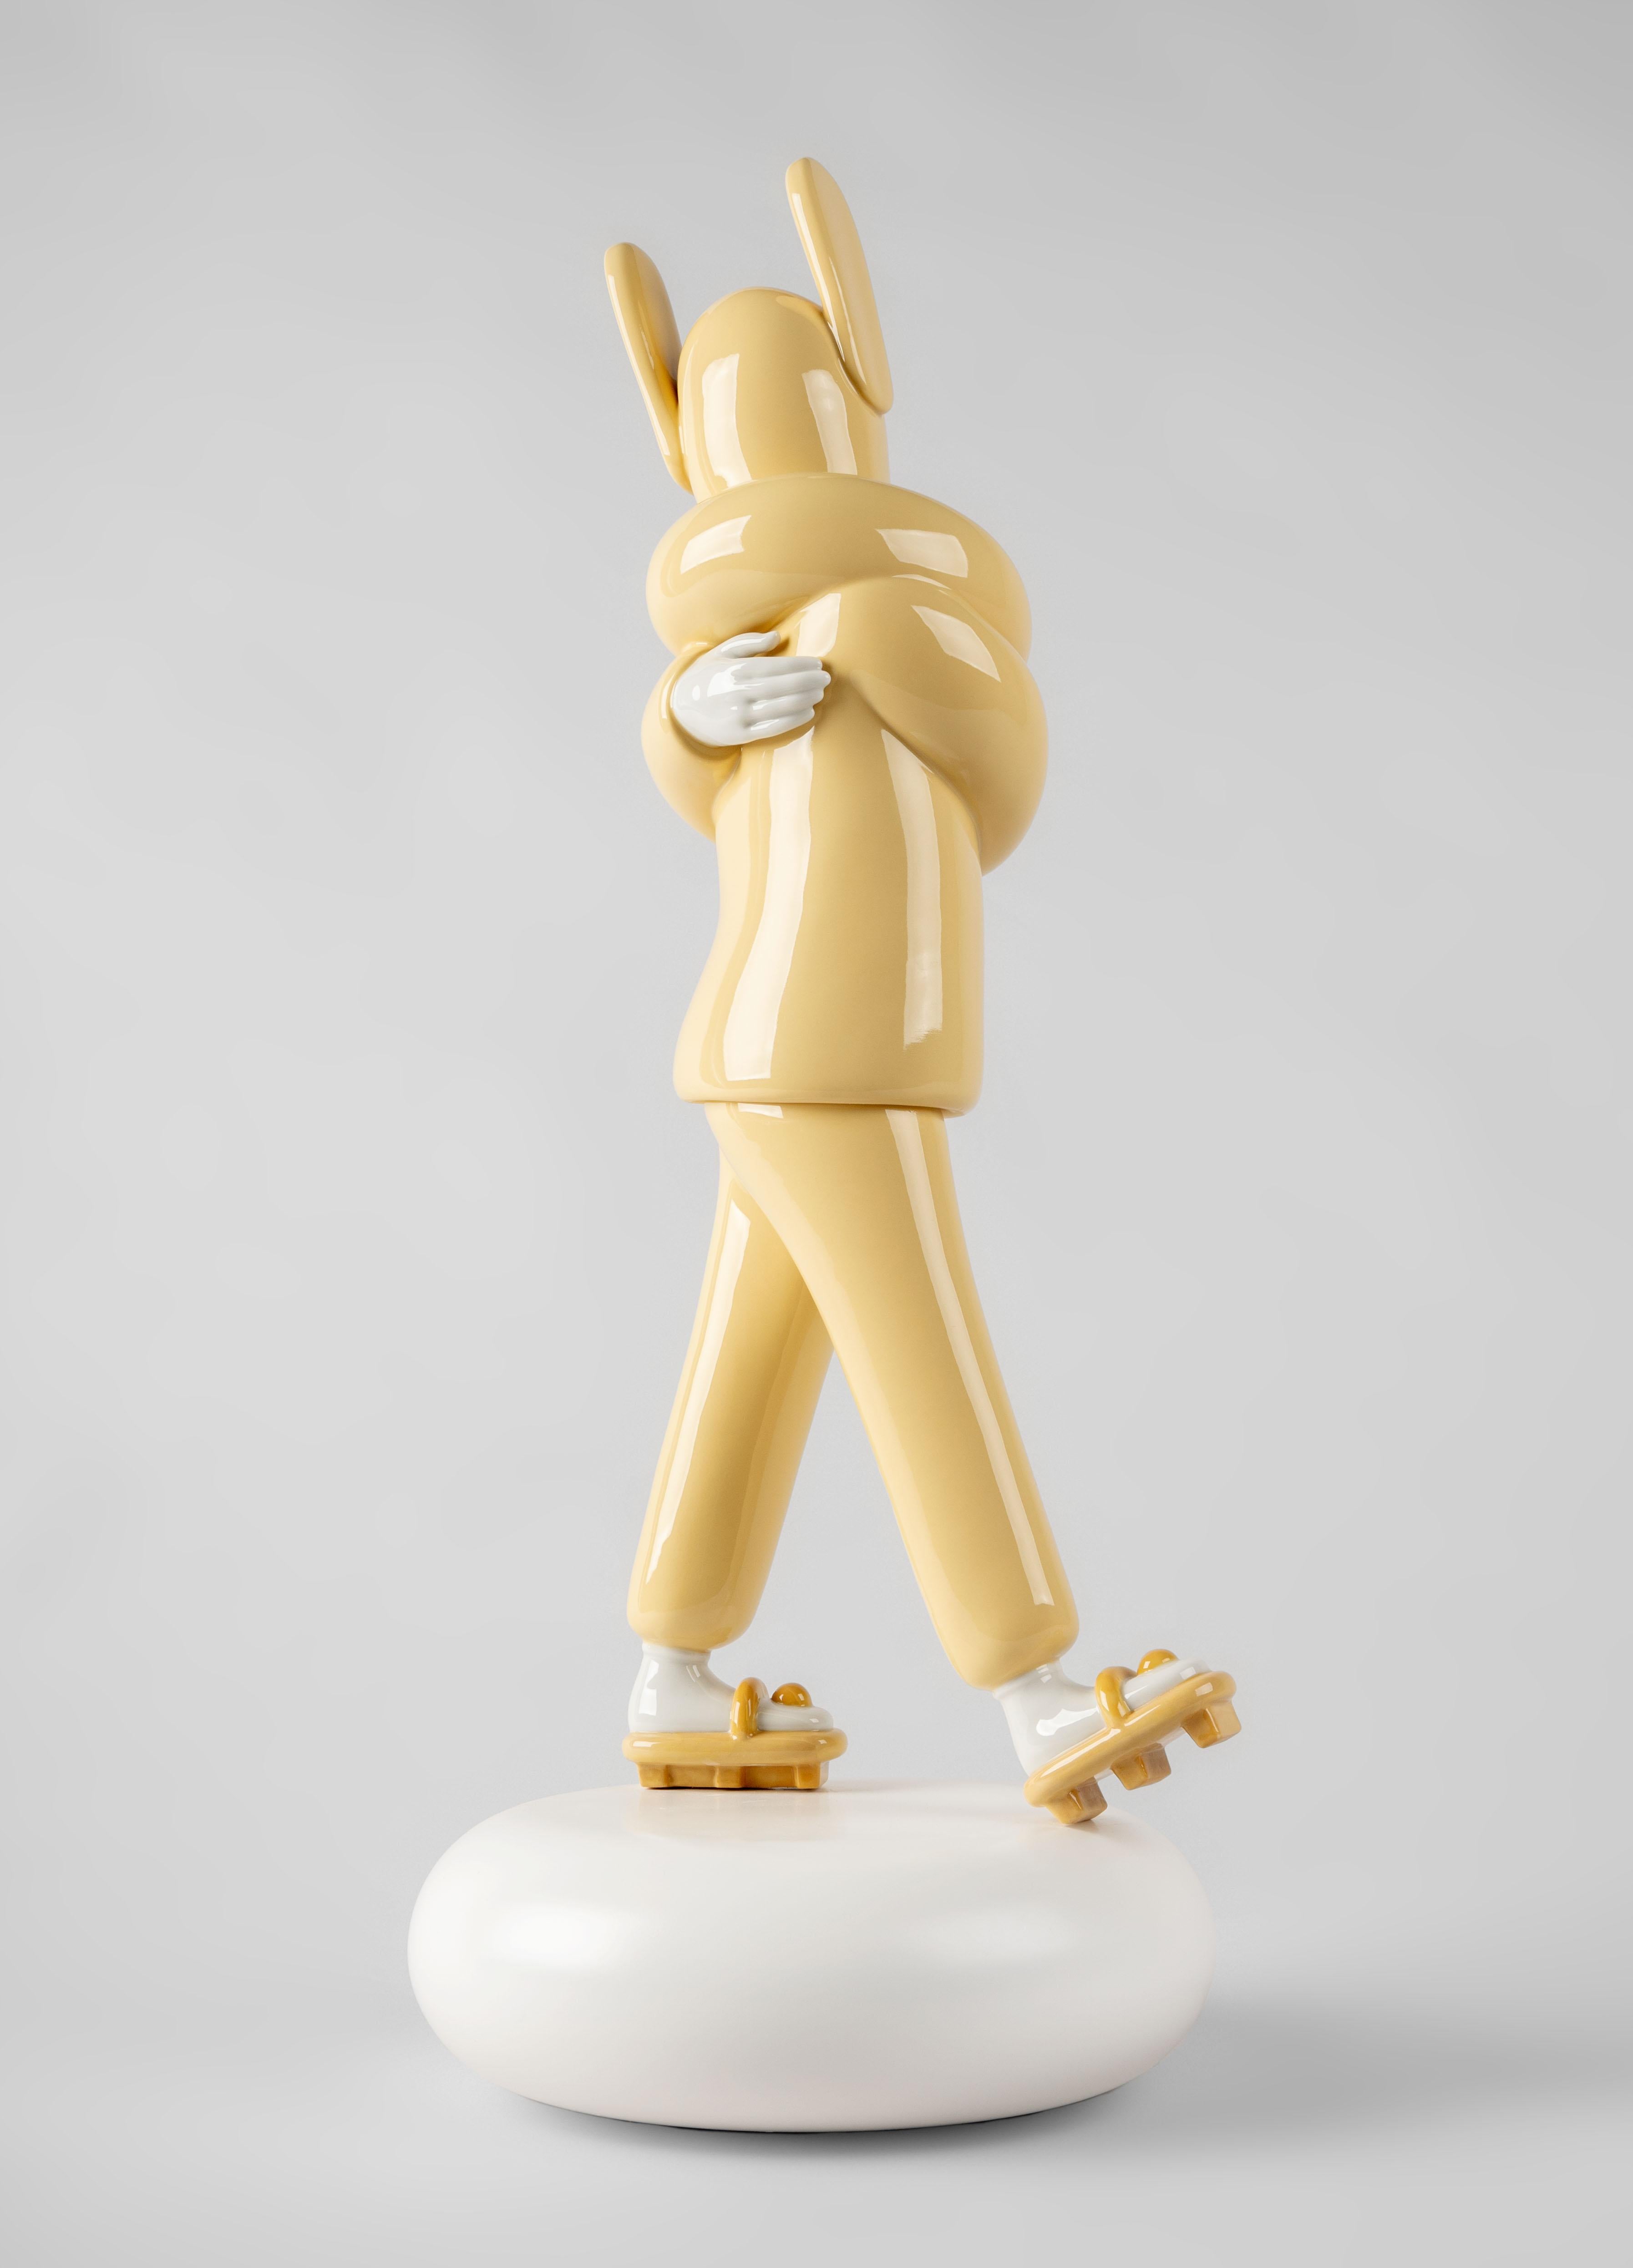 Porcelain creation depicting Jaime Hayon’s latest creation. A work that speaks about looking after oneself and harmony. Jaime Hayon’s latest creation in porcelain for Lladró is a new character sure to be another resounding success. Ten years after